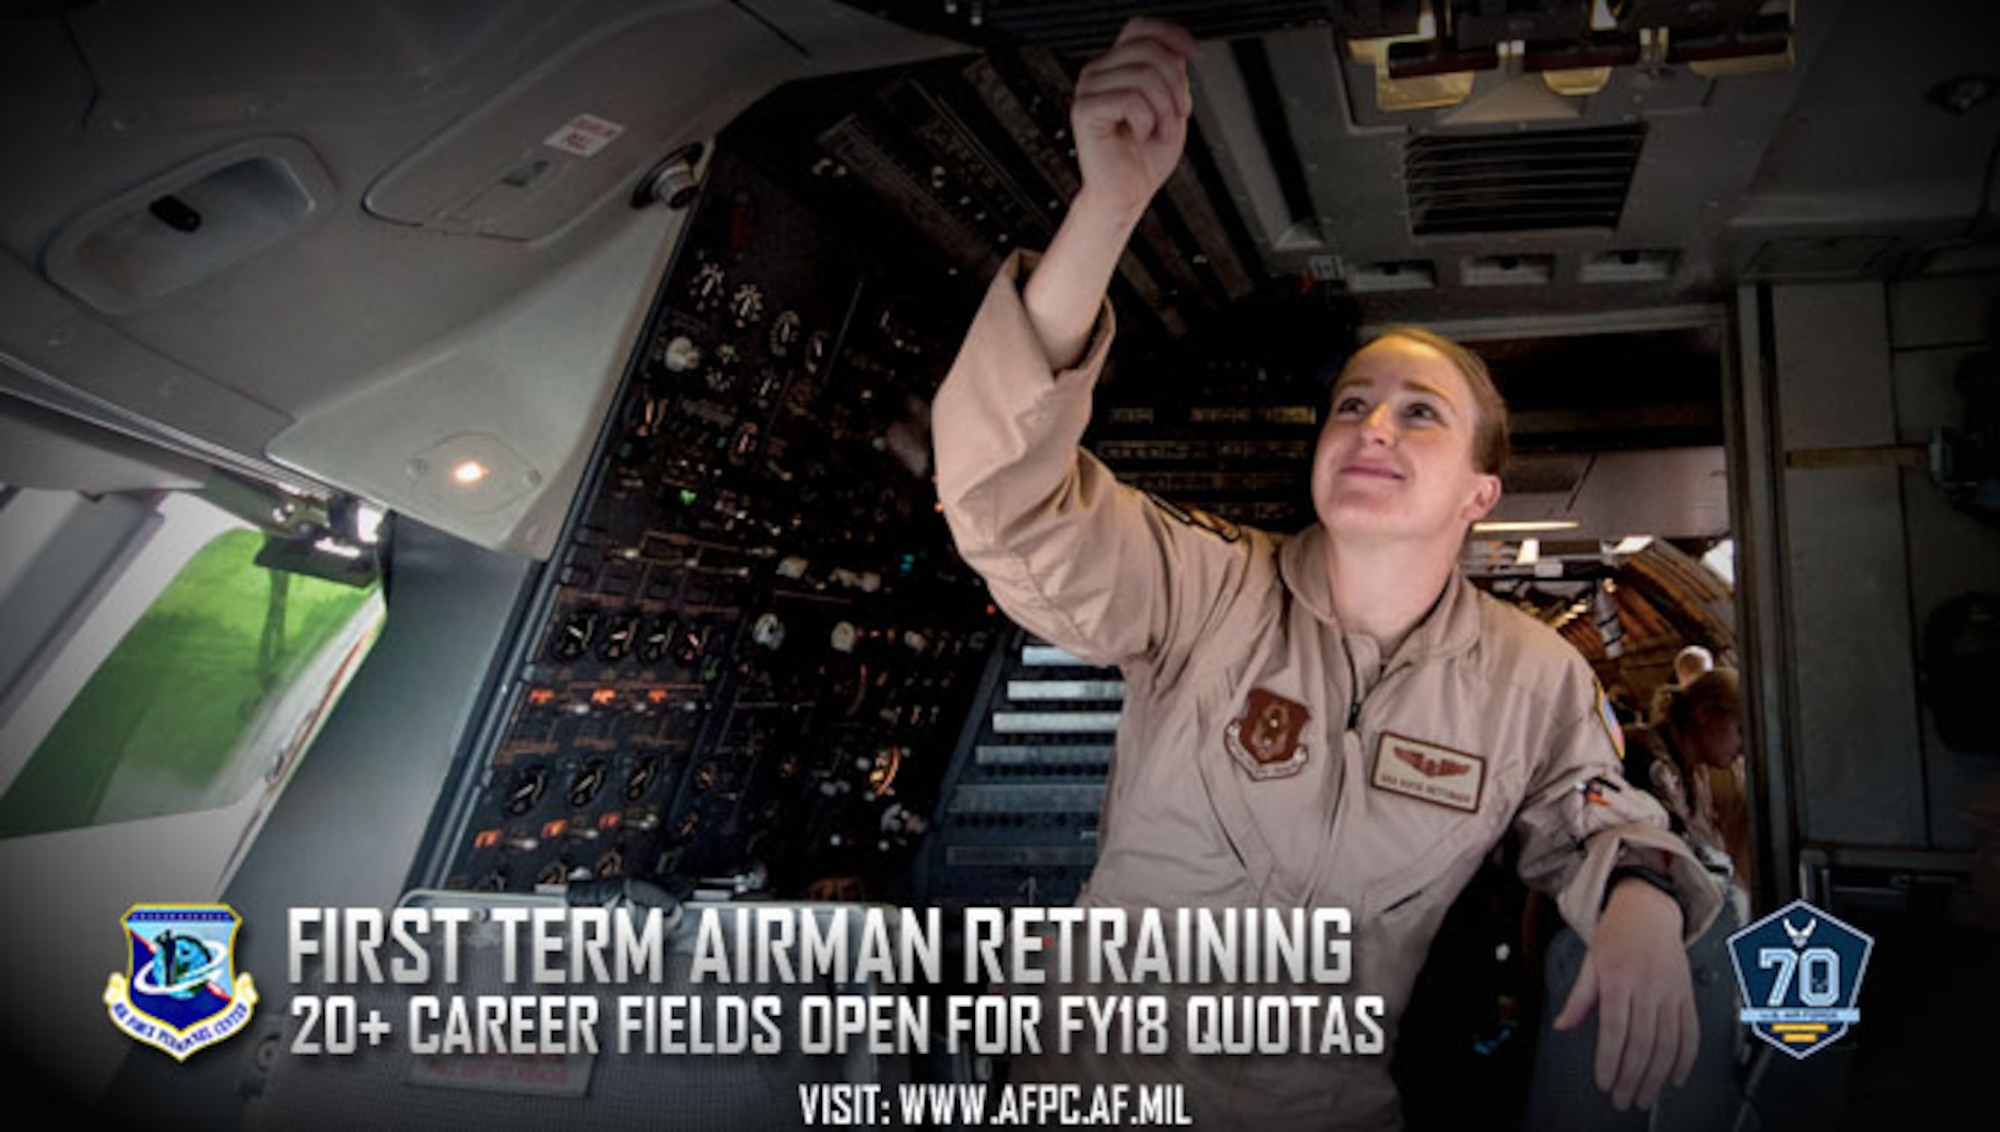 The First Term Airman Retraining Program allows first-term Airmen, including staff and technical sergeants who are in their first enlistment, to retrain in conjunction with a reenlistment. Flight engineer is one of the career fields on the list for fiscal year 2018. (U.S. Air Force photo by Shawn J. Jones)